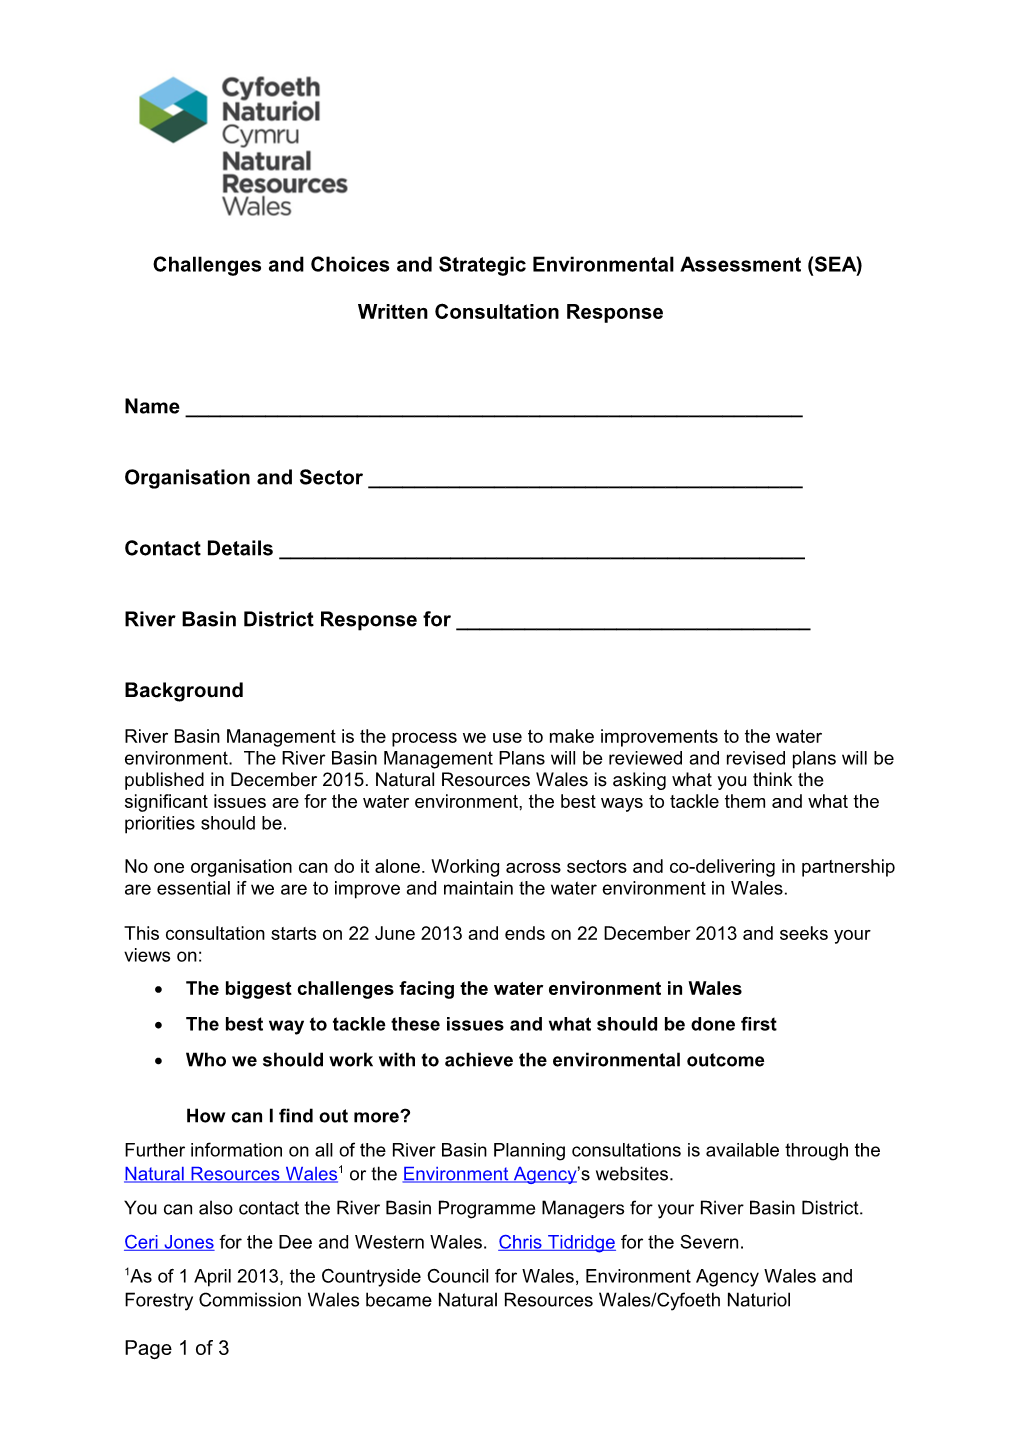 Challenges and Choices and Strategic Environmental Assessment (SEA)